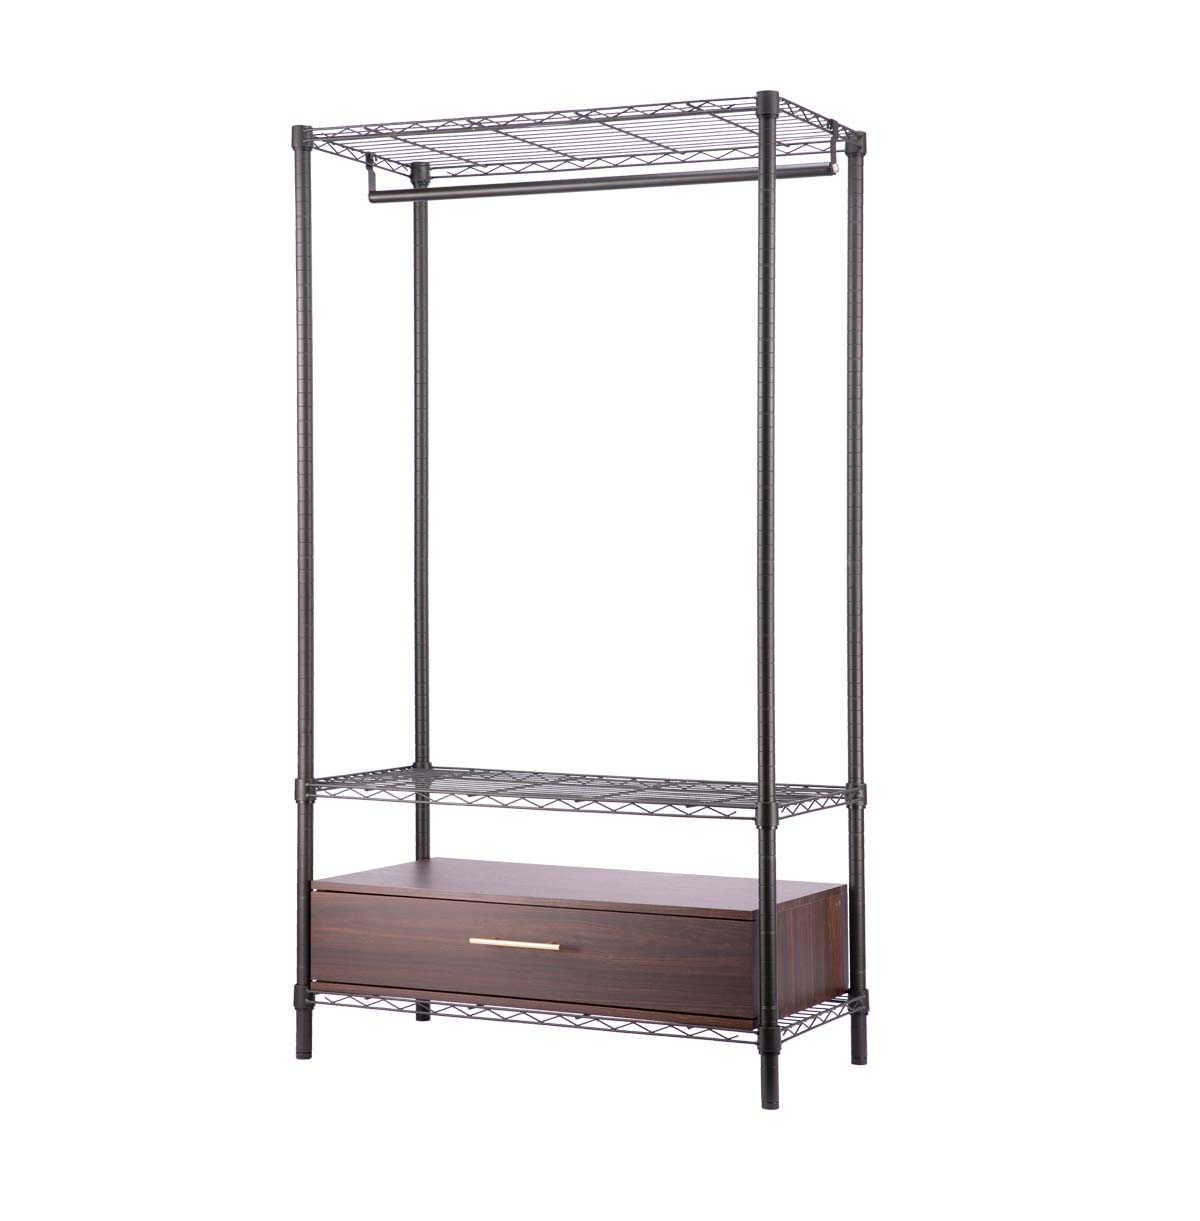 Heavy Duty Wire Garment Rack, Metal Clothing Rack with Hanging Rods / Freestanding Open Wardrobe Organizer